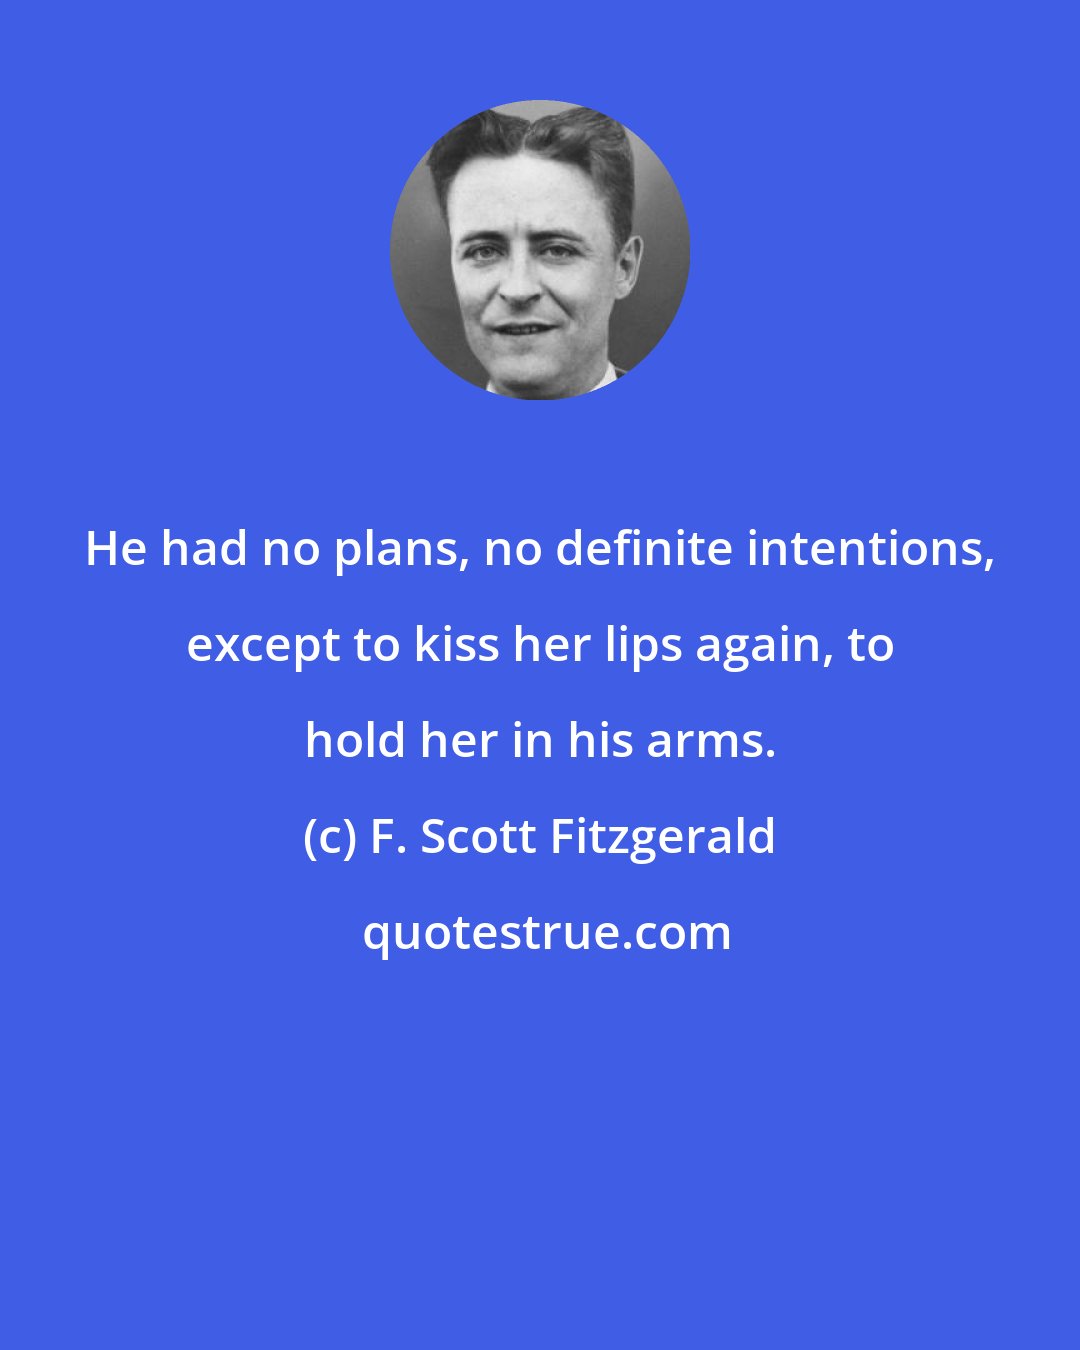 F. Scott Fitzgerald: He had no plans, no definite intentions, except to kiss her lips again, to hold her in his arms.